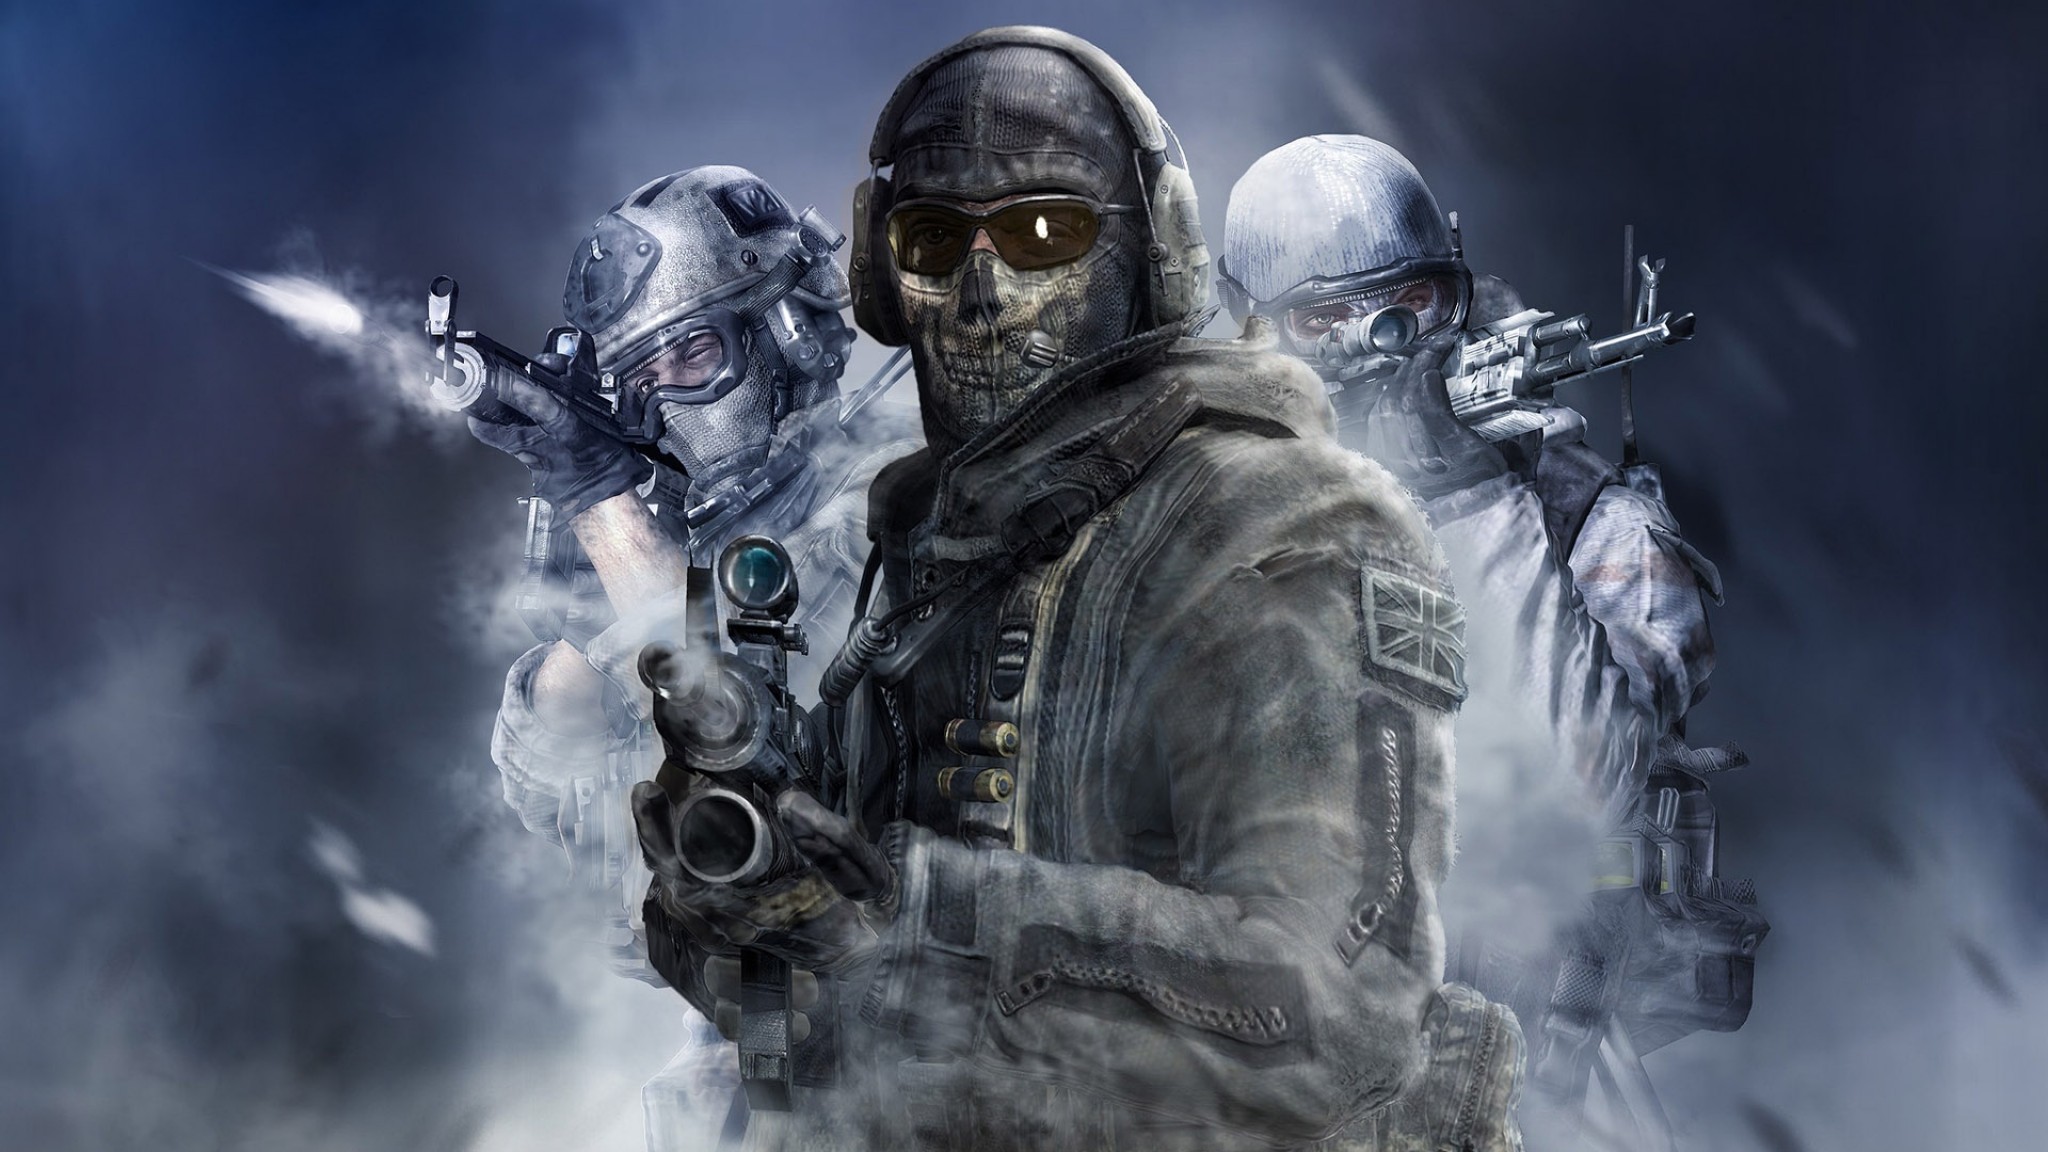 Call of Duty: Ghosts Bringing Invasion DLC to Playstation, PC